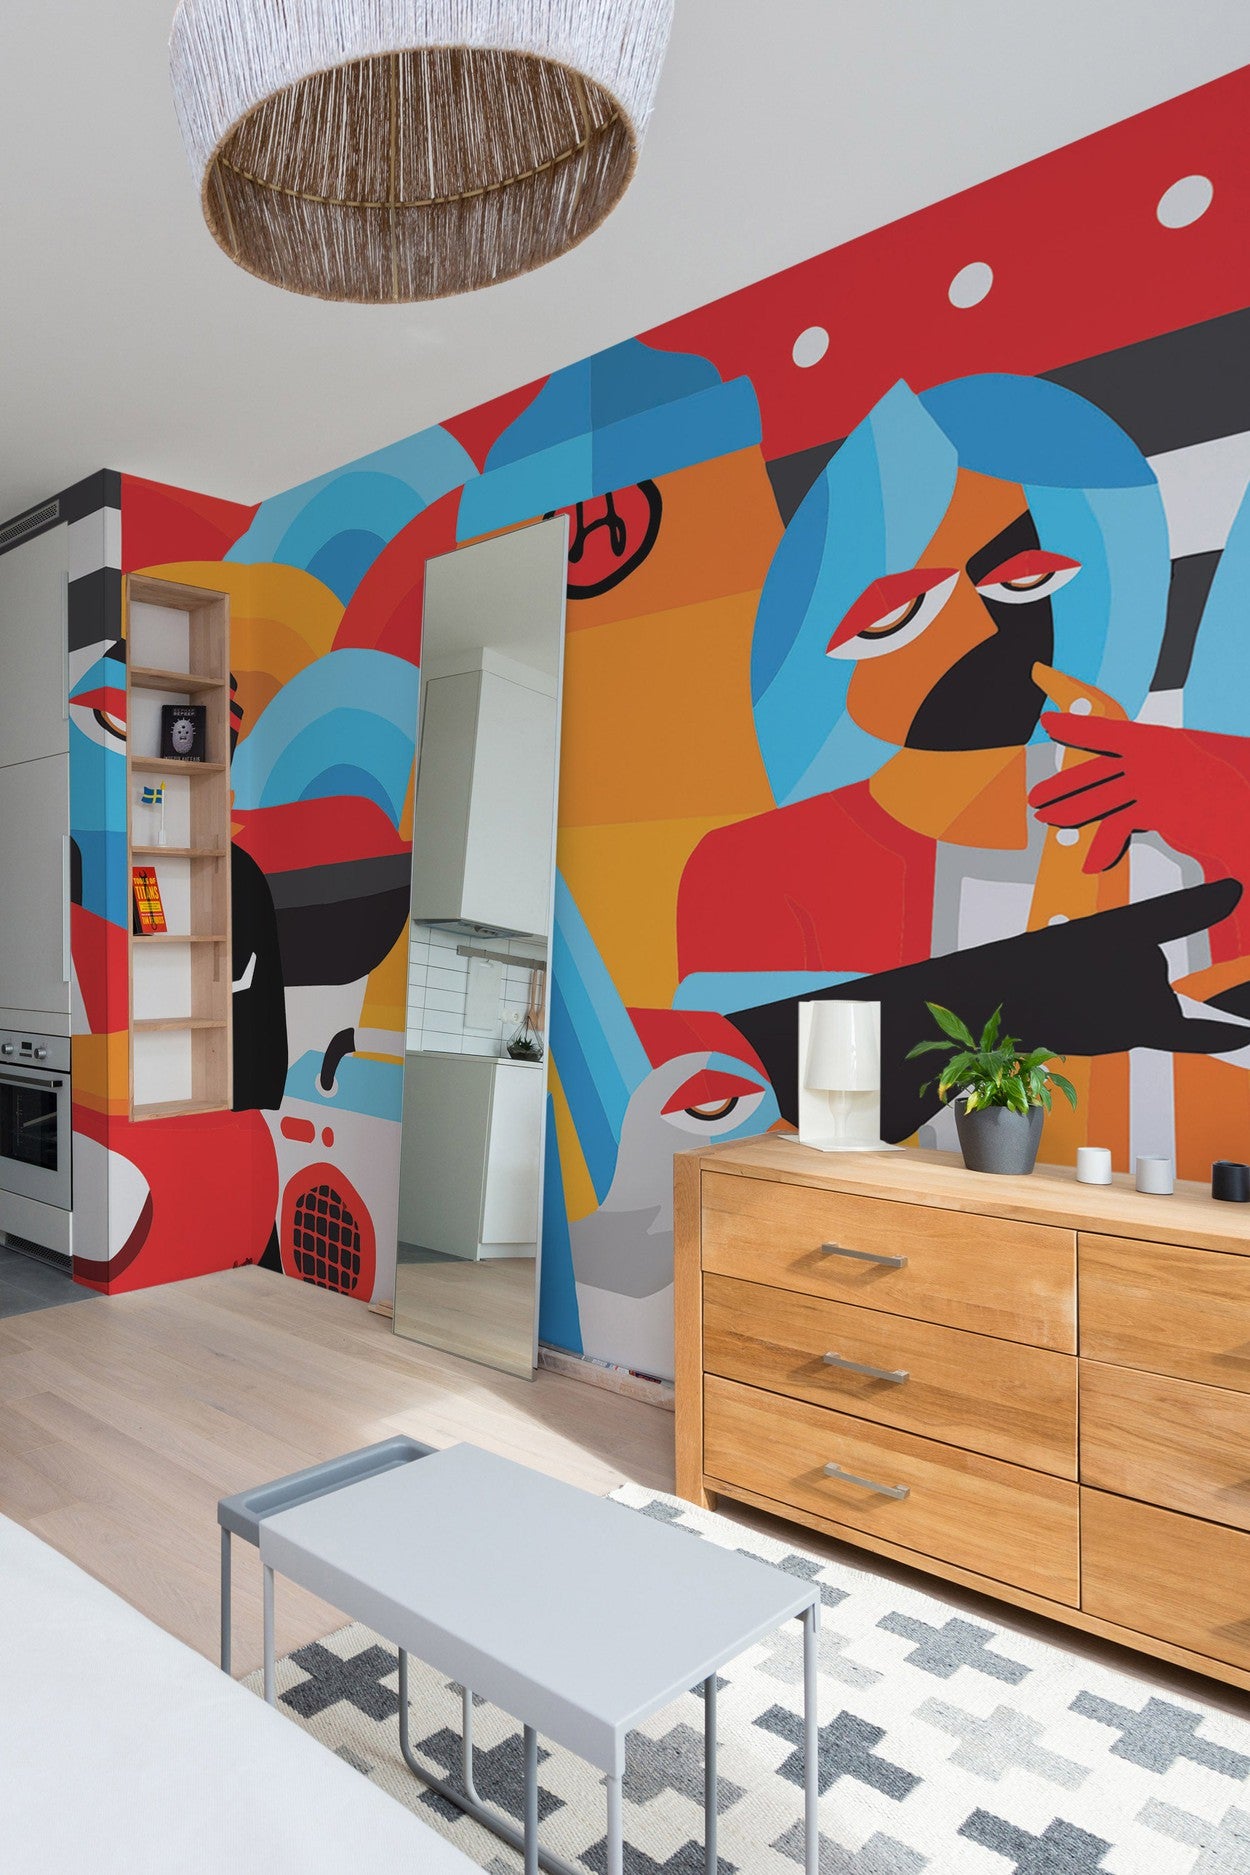 Modern kitchen interior with a vibrant pop art wall mural, wooden cabinets, and contemporary furniture.